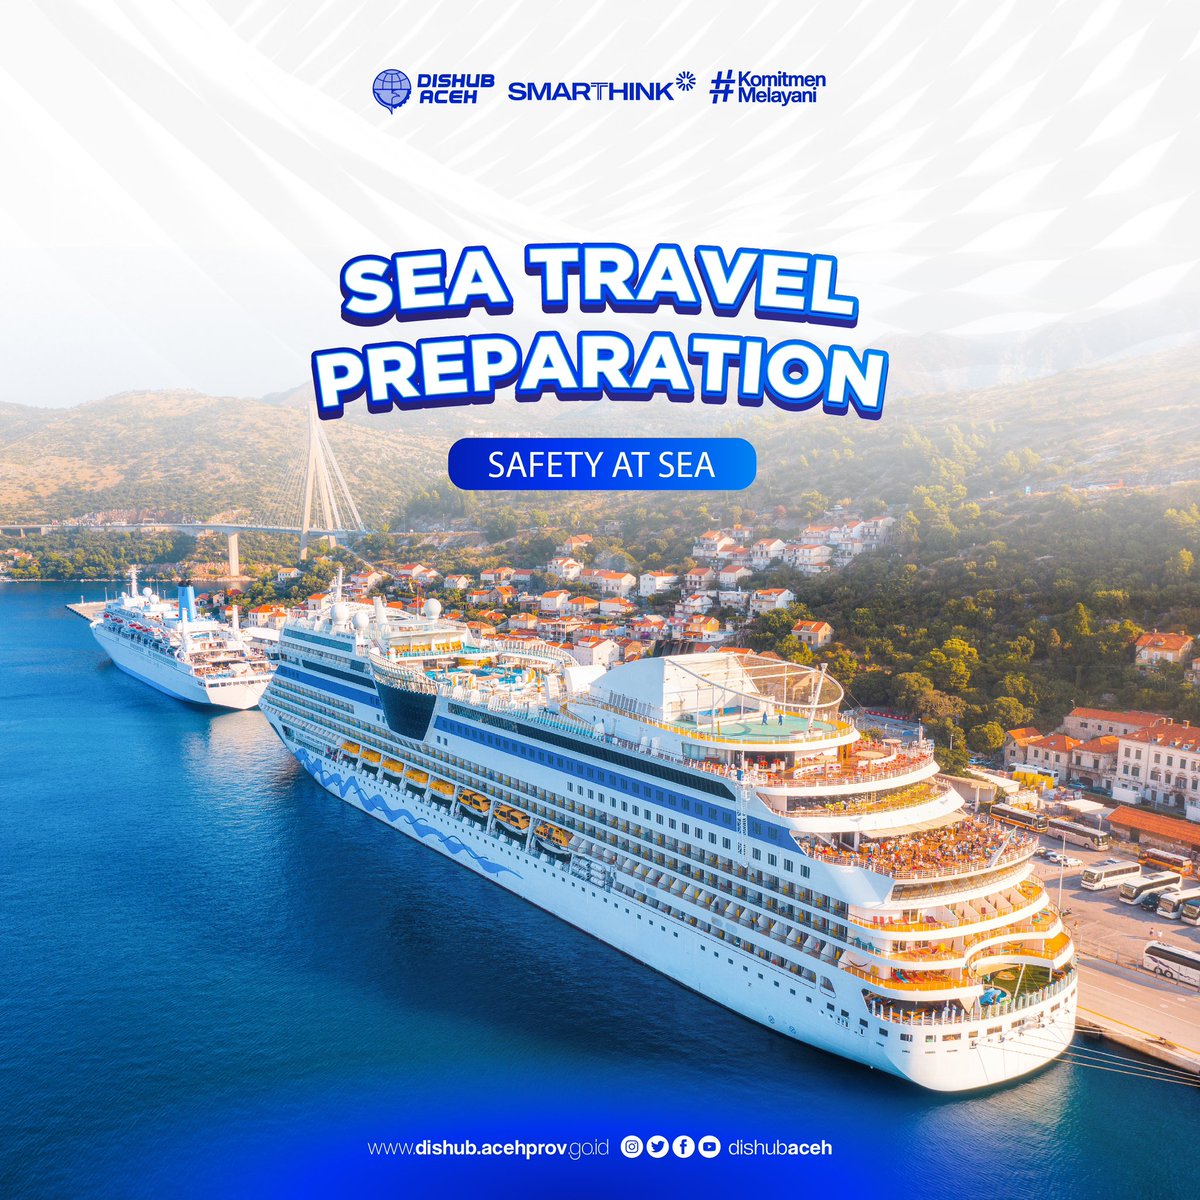 No matter which type of sea trip you choose to go on, there are a few tips and tricks that can help ensure your vacation goes smoothly. 
Lets take a look!
#DishubAceh
#SeaTravel
#English